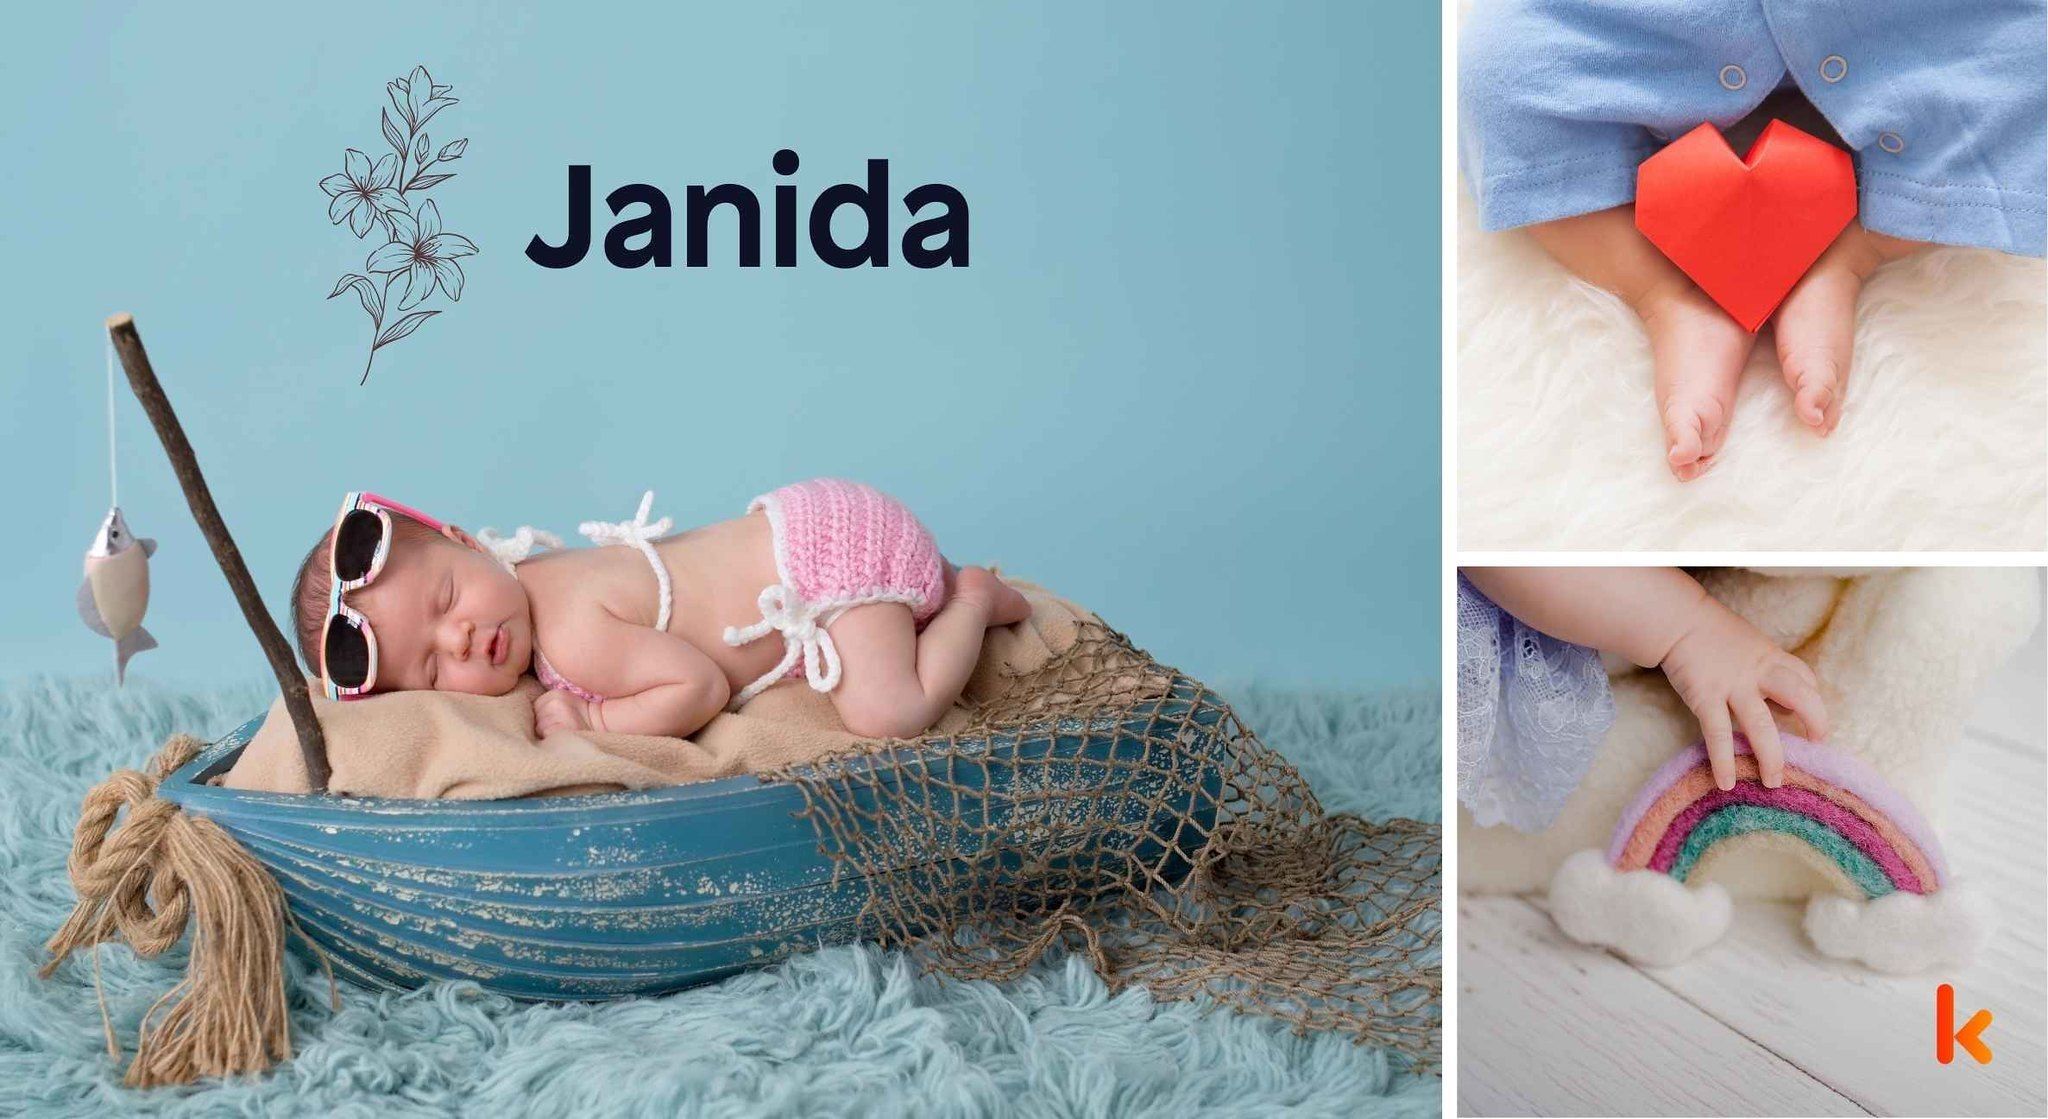 Meaning of the name Janida